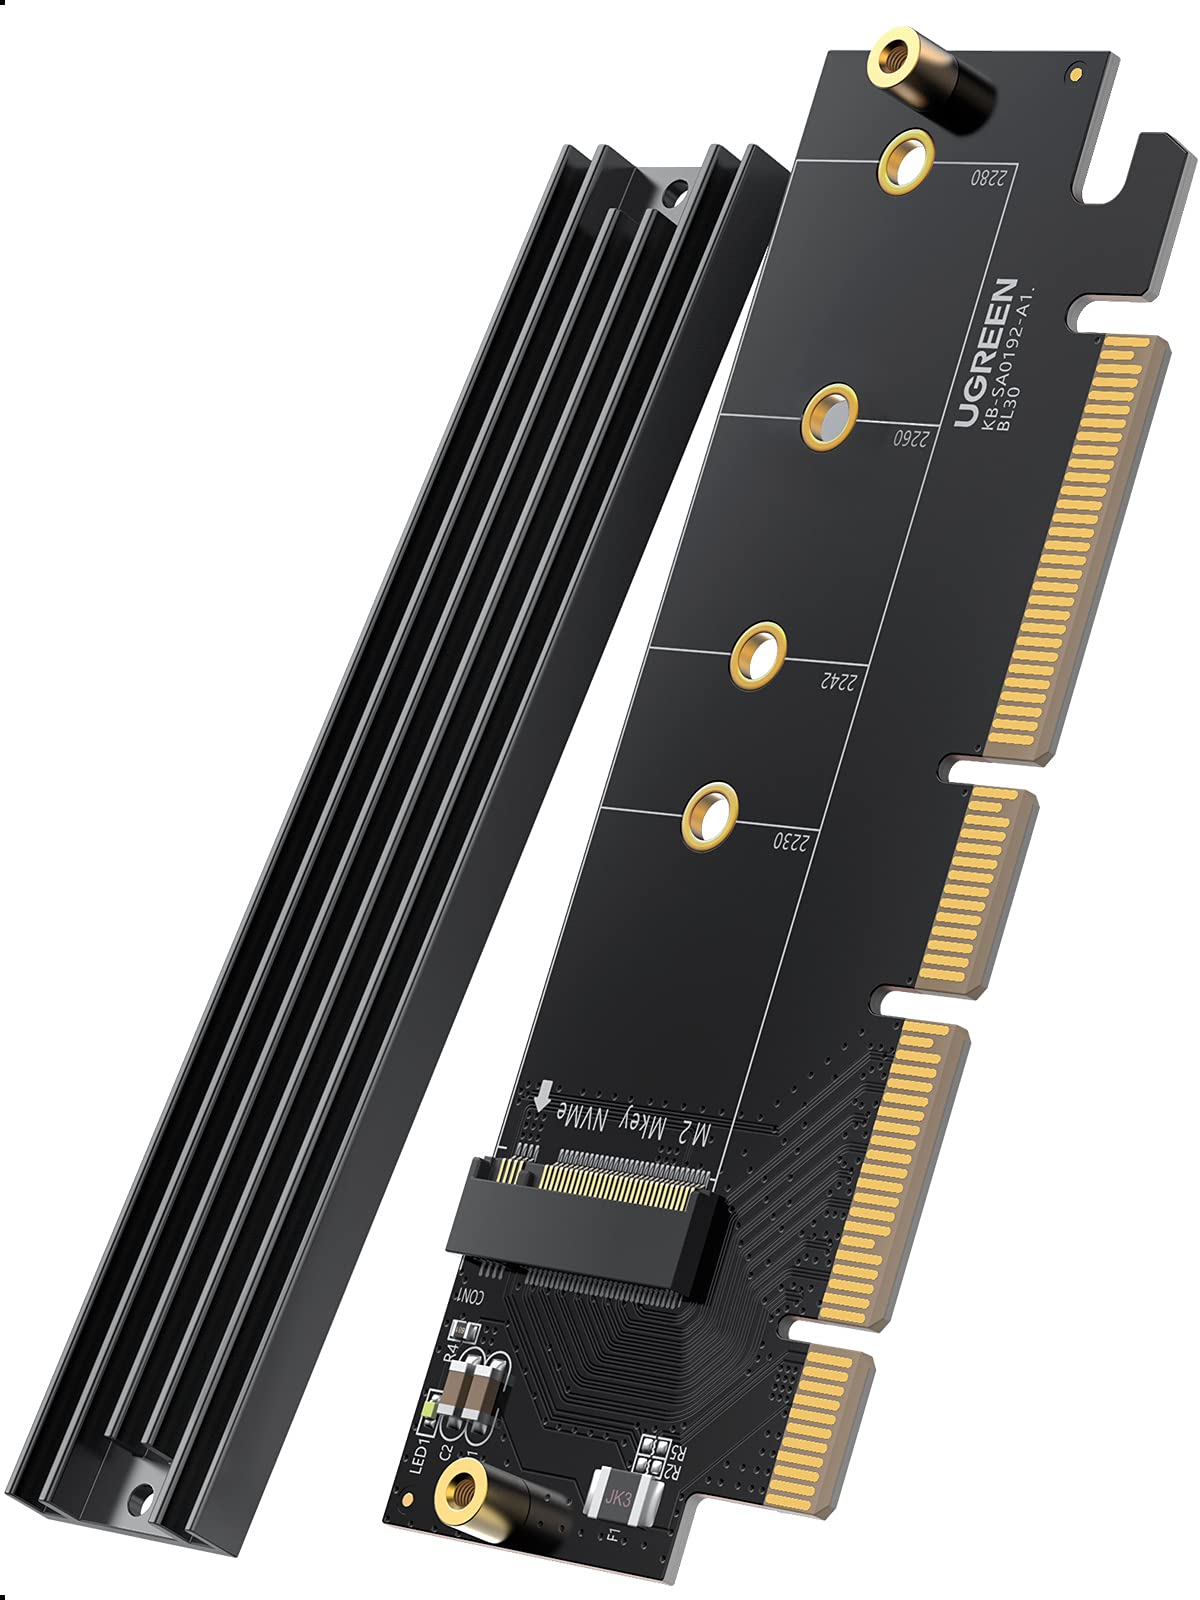 UGREEN NVMe PCIe Adapter, M.2 SSD M Key and M+B Key to PCIe 4.0 Adapter X4 X8 X16 Slot Card with Heat Sink, Up to 64Gbps Max, Size for NVMe M.2 SSD 2230 2242 2260 2280